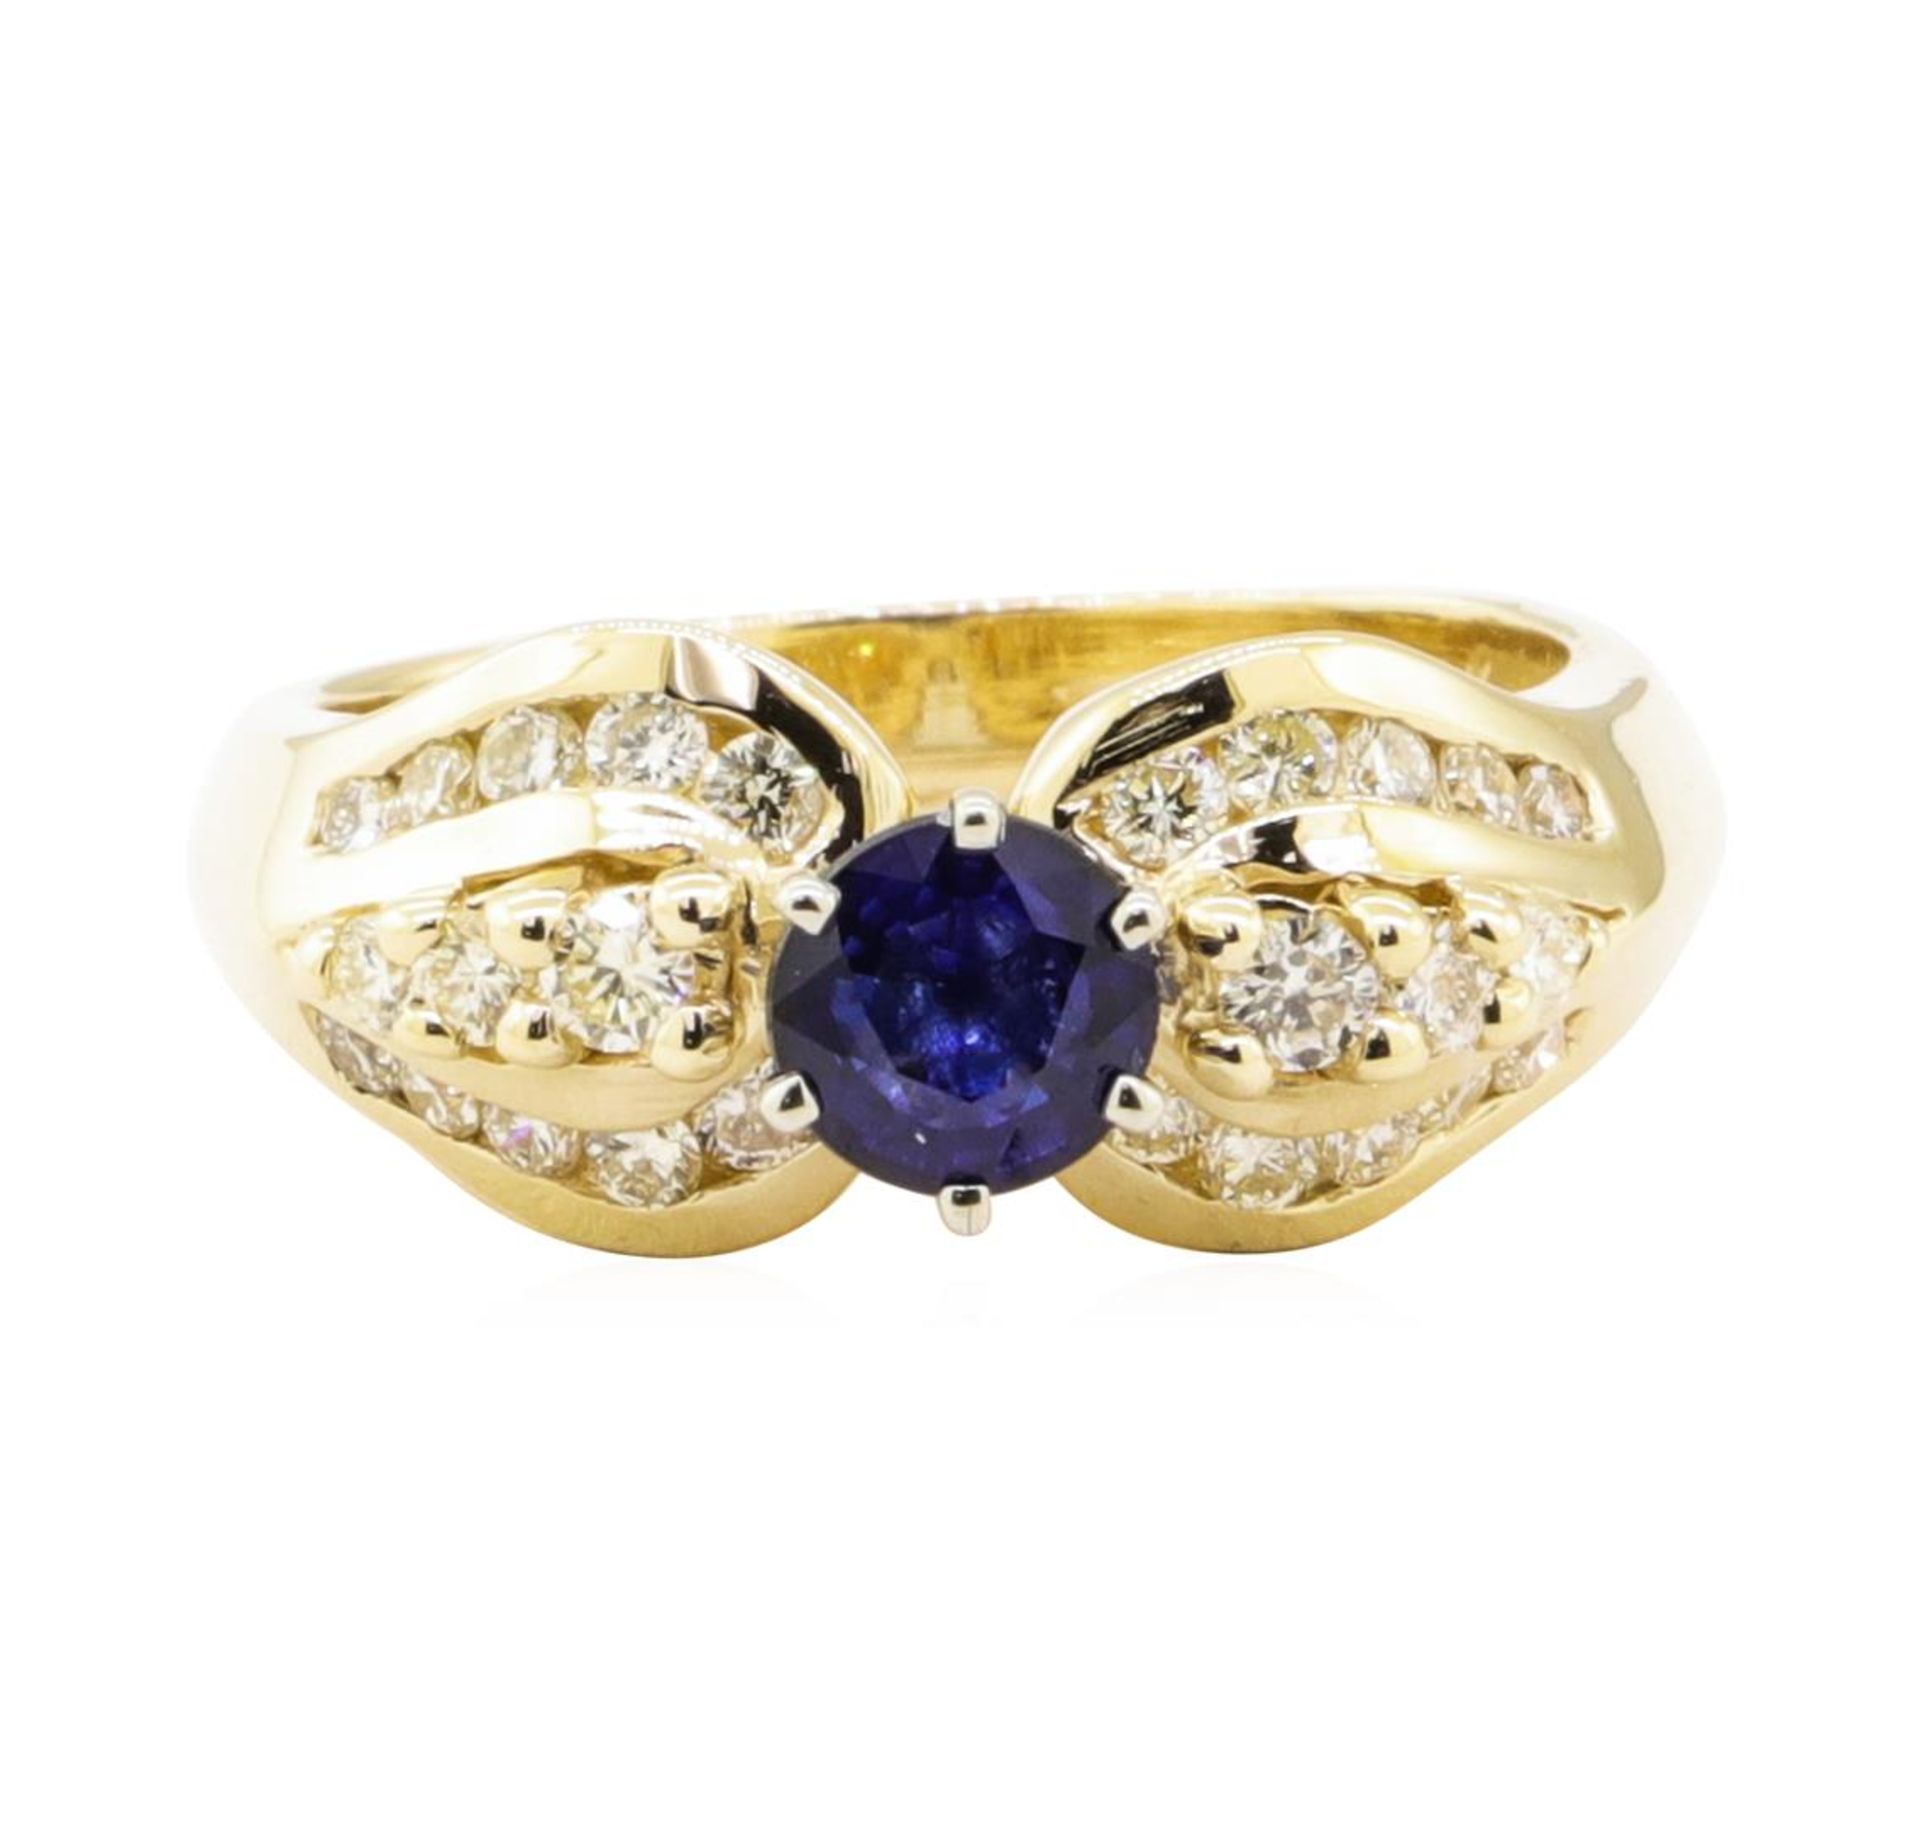 1.05 ctw Blue Sapphire And Diamond Ring - 14KT Yellow Gold - Image 2 of 5